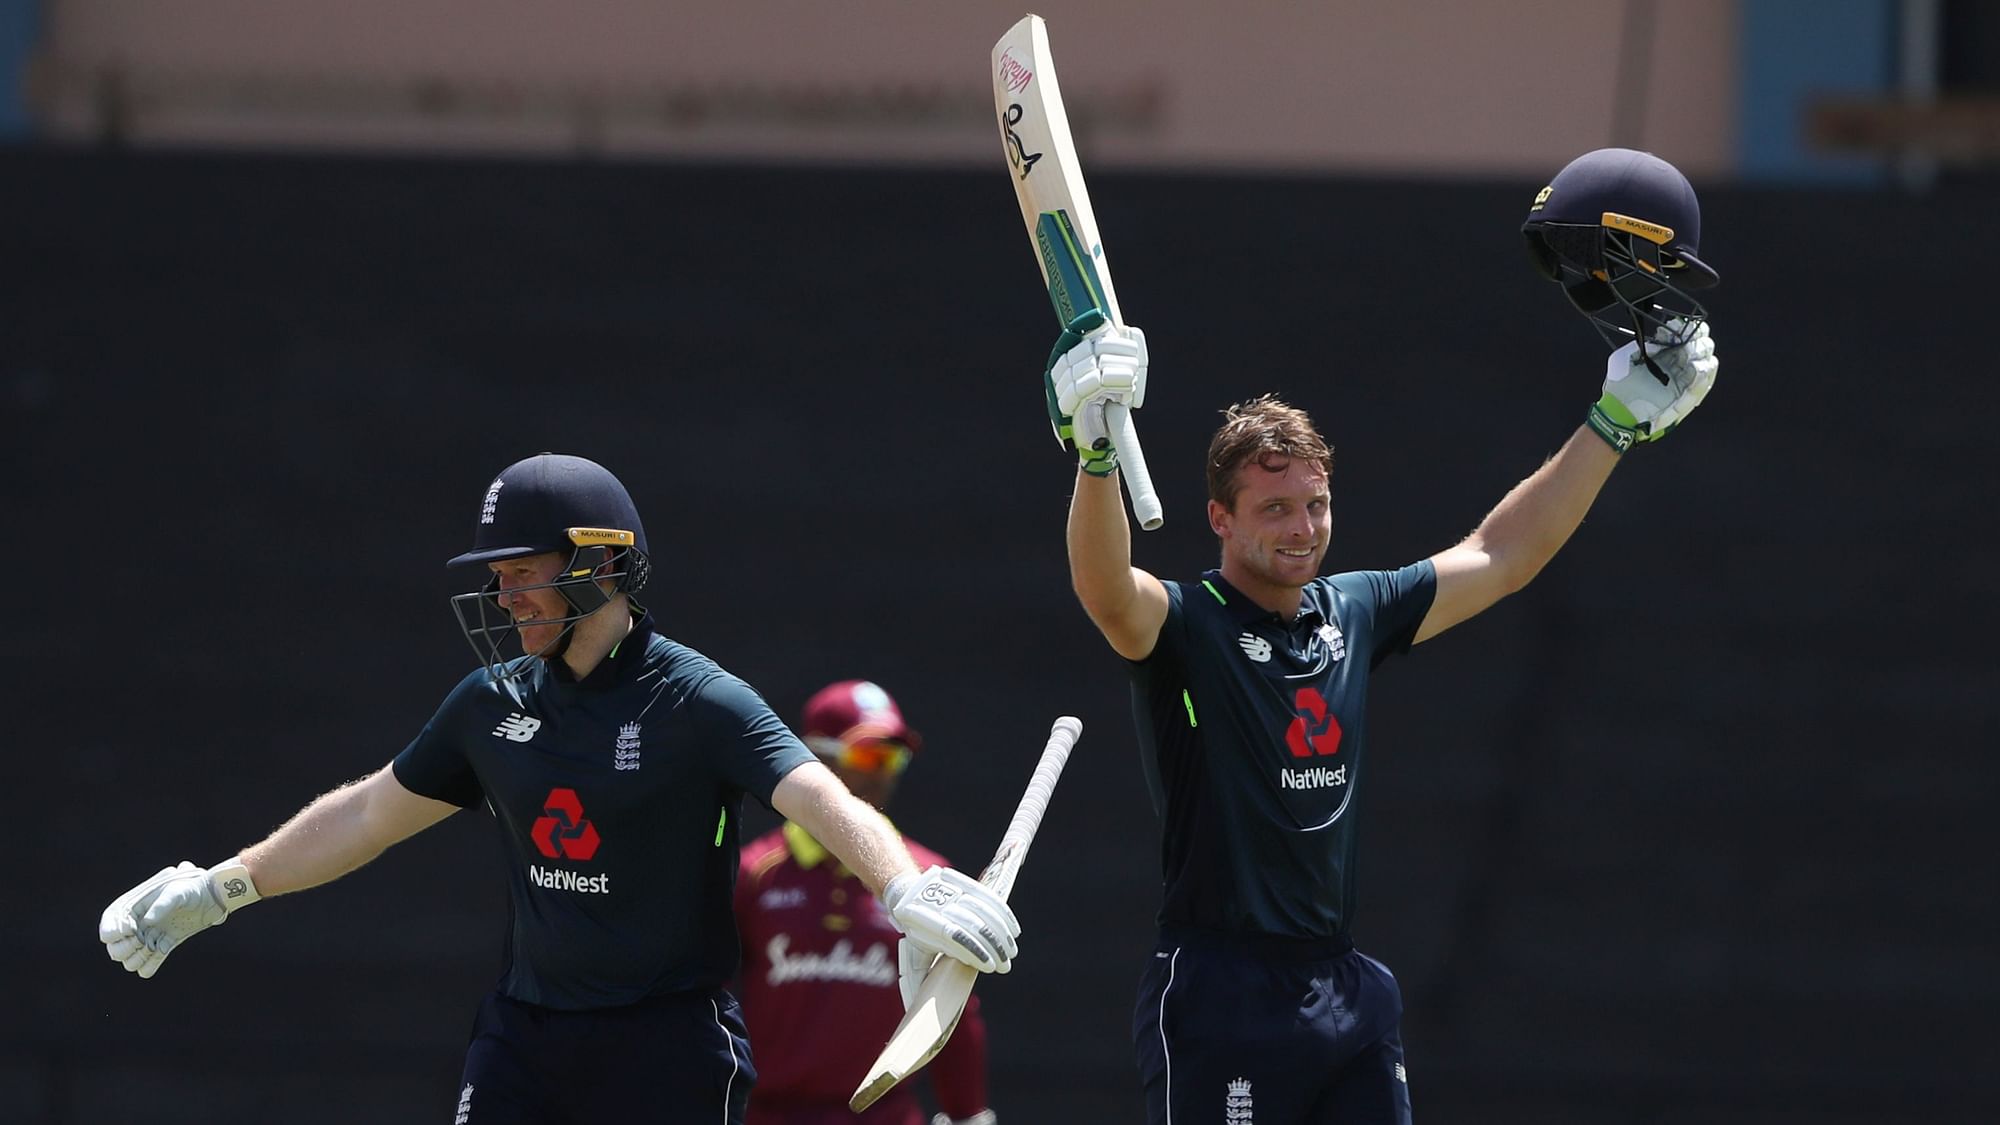 England ultimately had the stronger supporting cast, as Eoin Morgan made a 103 of his own during a 204-run stand with Jos Buttler.